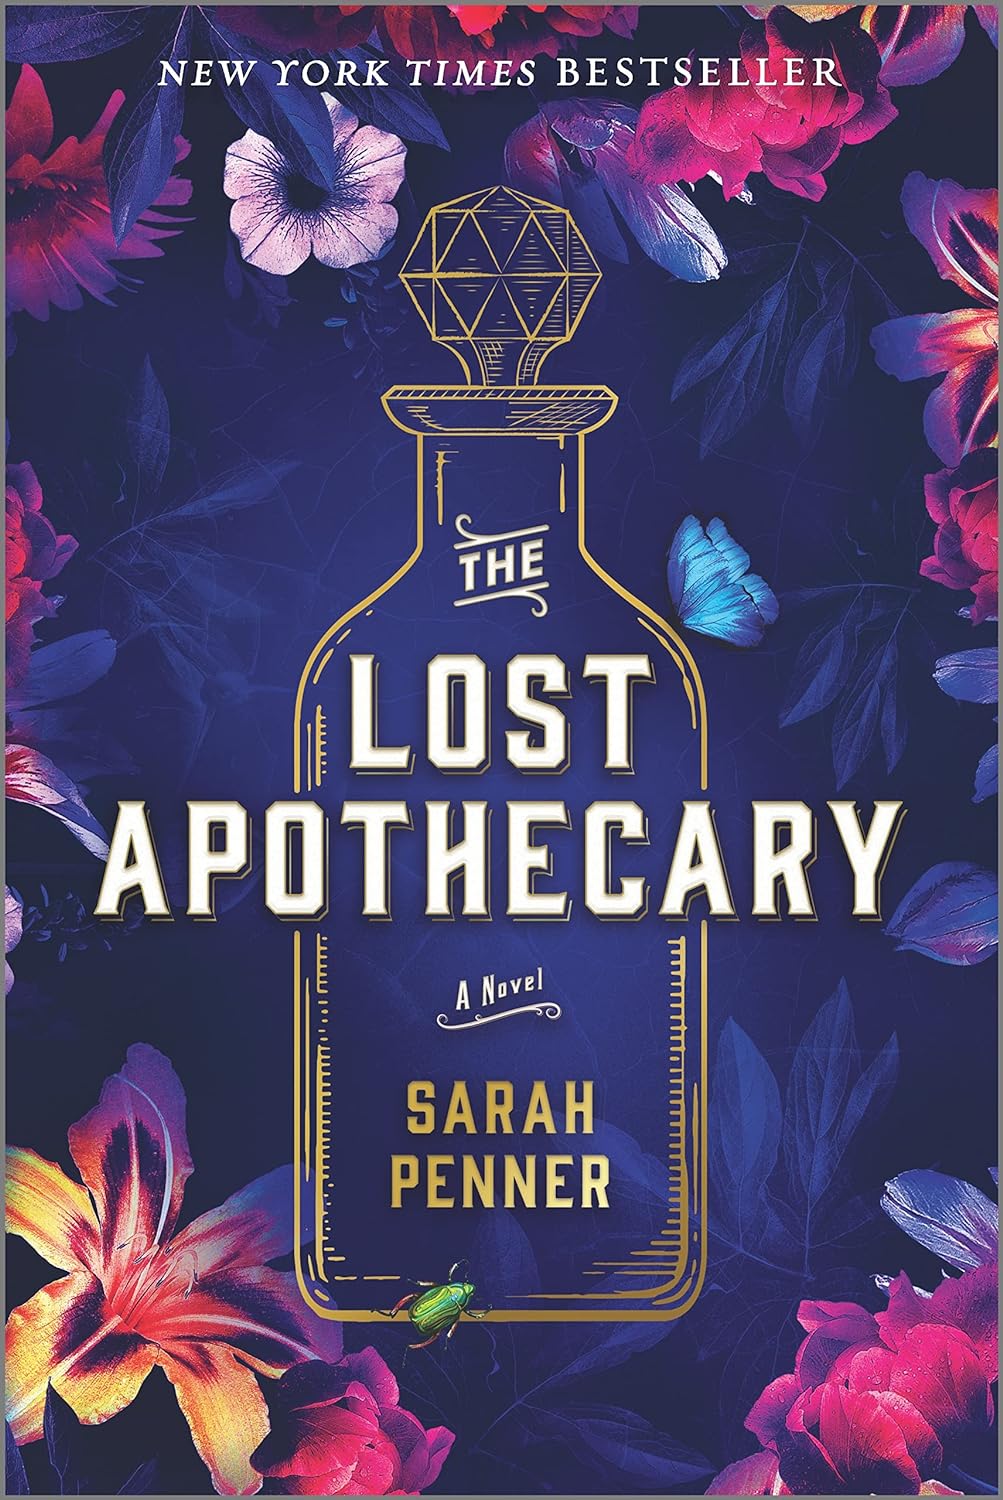 The Last Apothecary